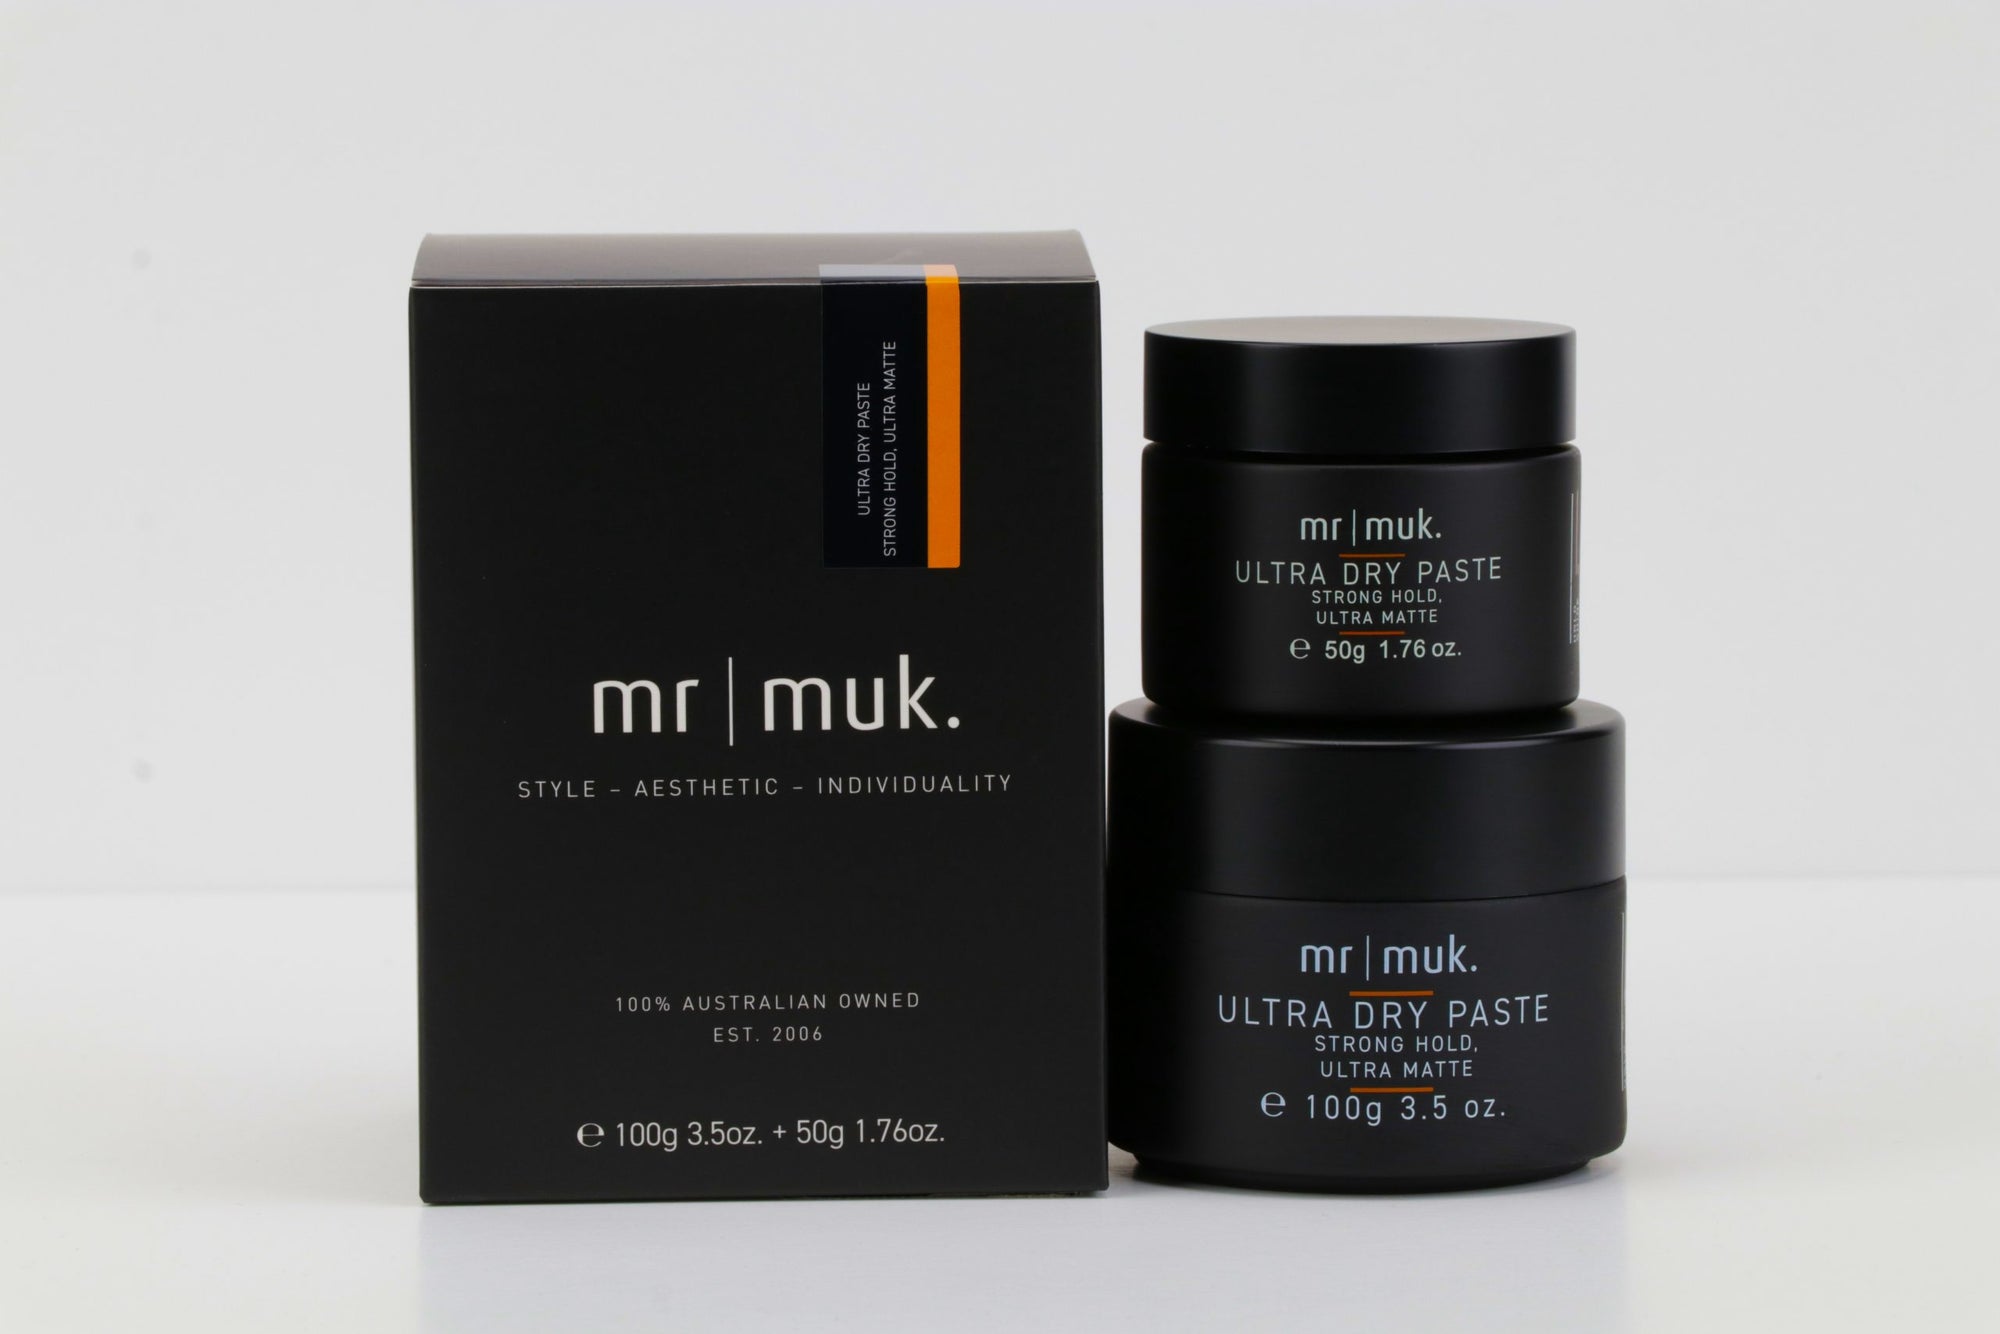 Duo Pack Muk Strong Hold Ultra Matte Paste